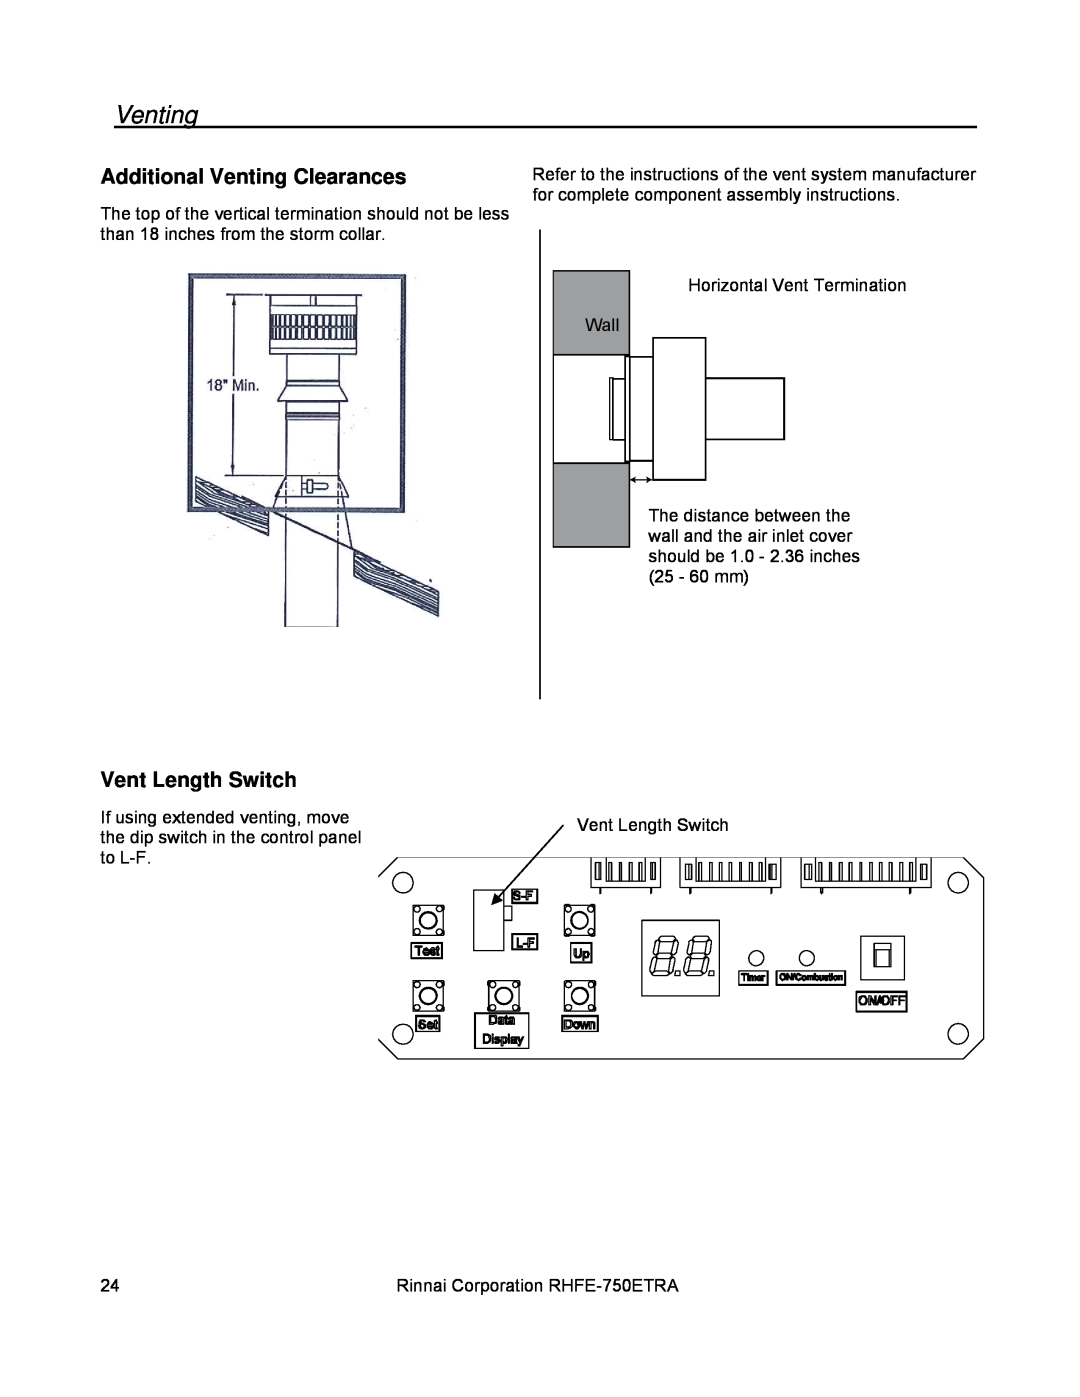 Rinnai RHFE-750ETRA installation manual Additional Venting Clearances, Vent Length Switch 